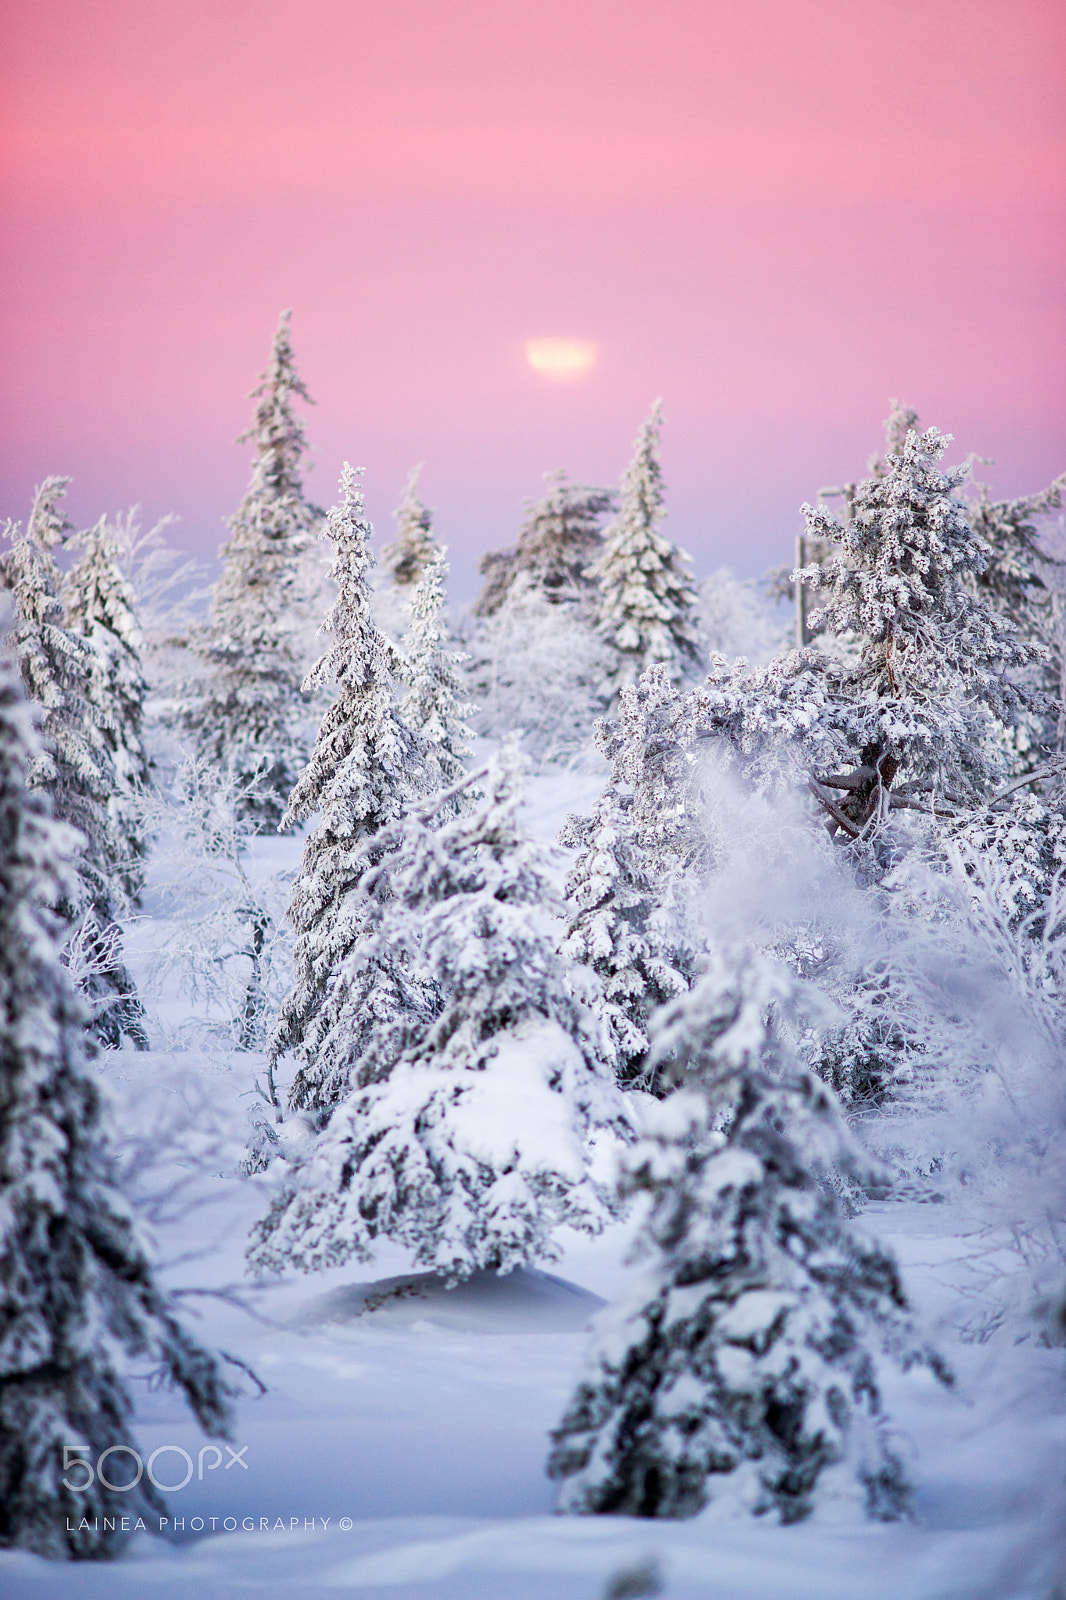 Sony Alpha DSLR-A850 sample photo. Full moon over a snowy forest in winter wonderland at dawn. photography